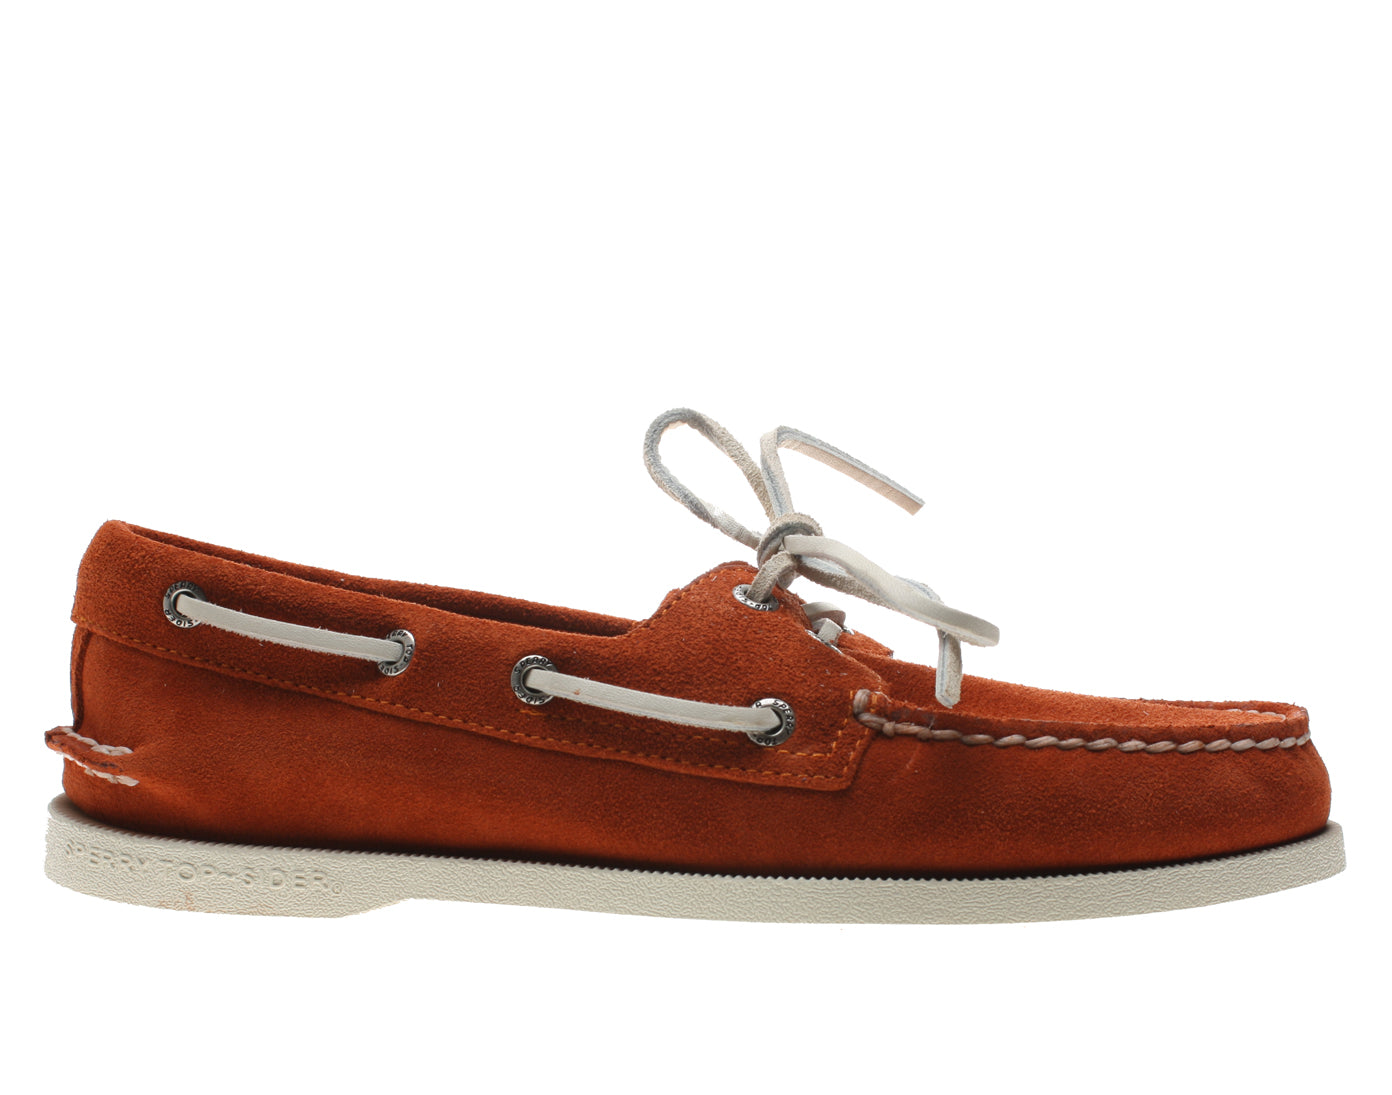 Sperry Top Sider Cloud Logo Authentic Original 2-Eye Men's Boat Shoes